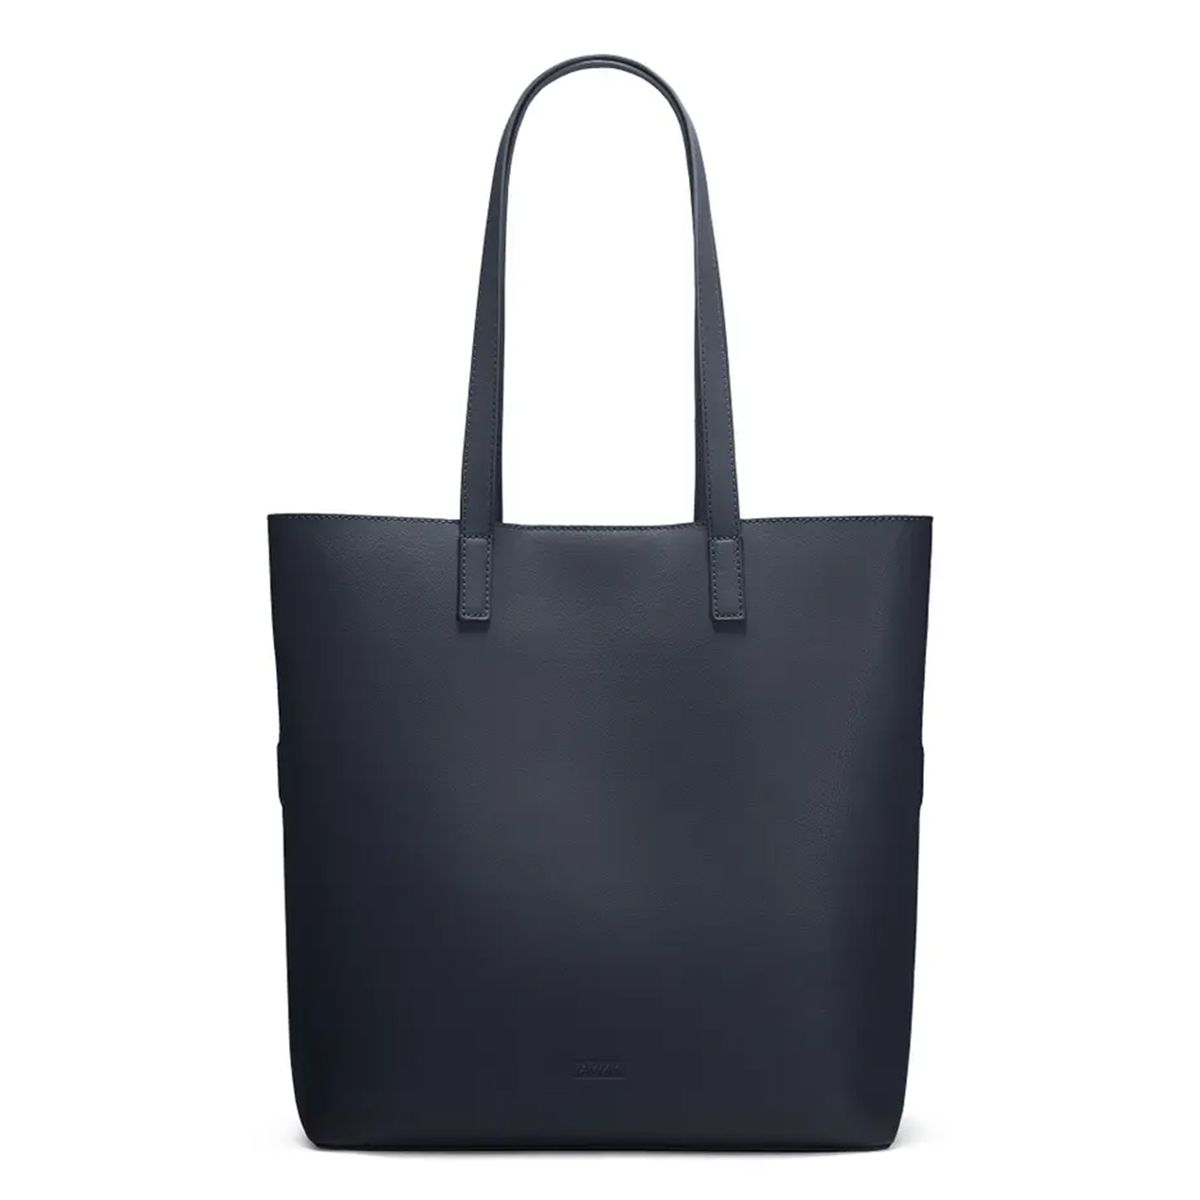 Away The Longitude Tote in Navy Leather